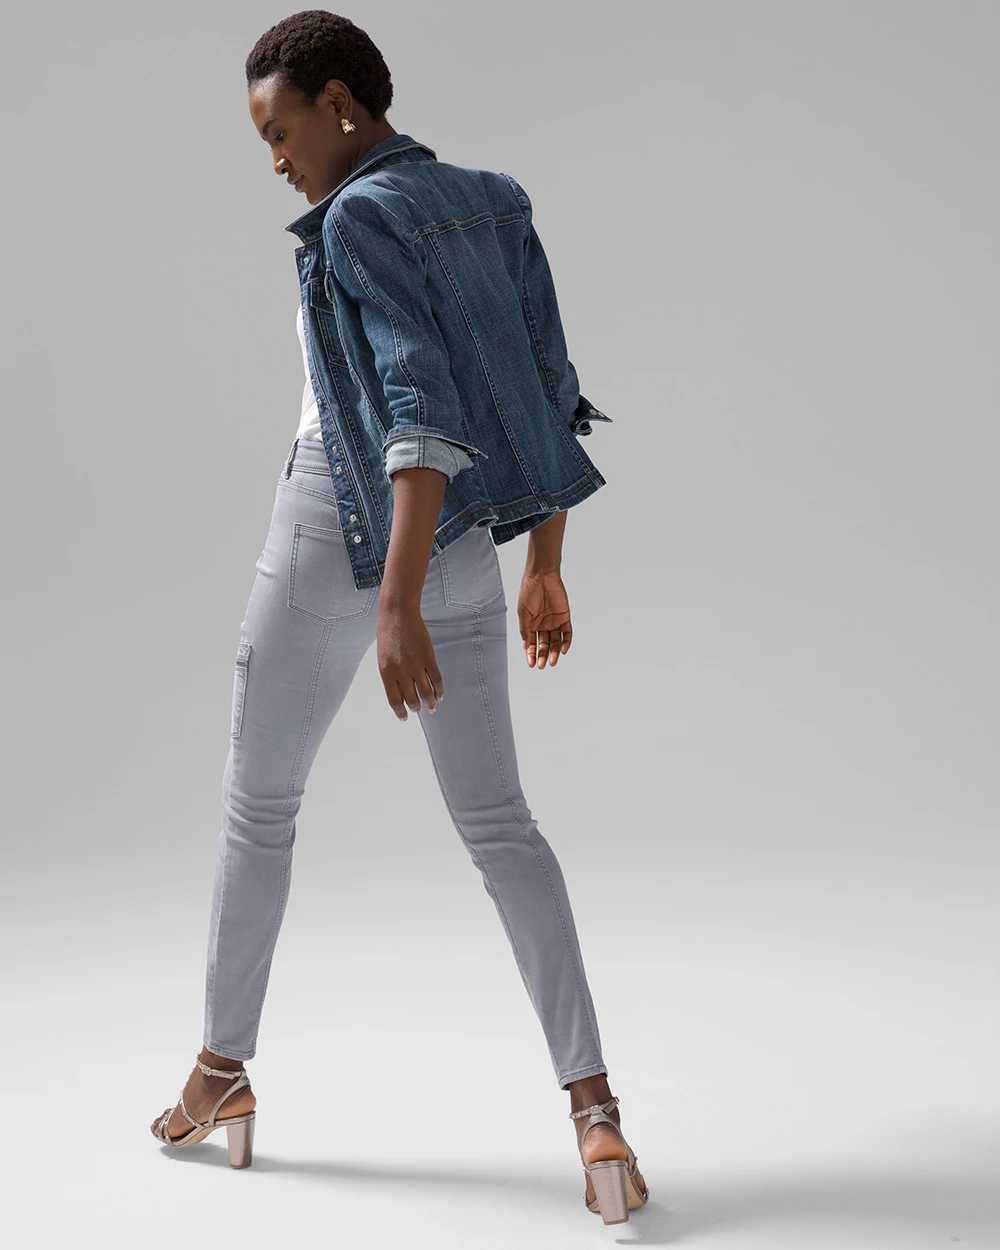 High-Rise Everyday Soft Denim  Skinny Jeans click to view larger image.